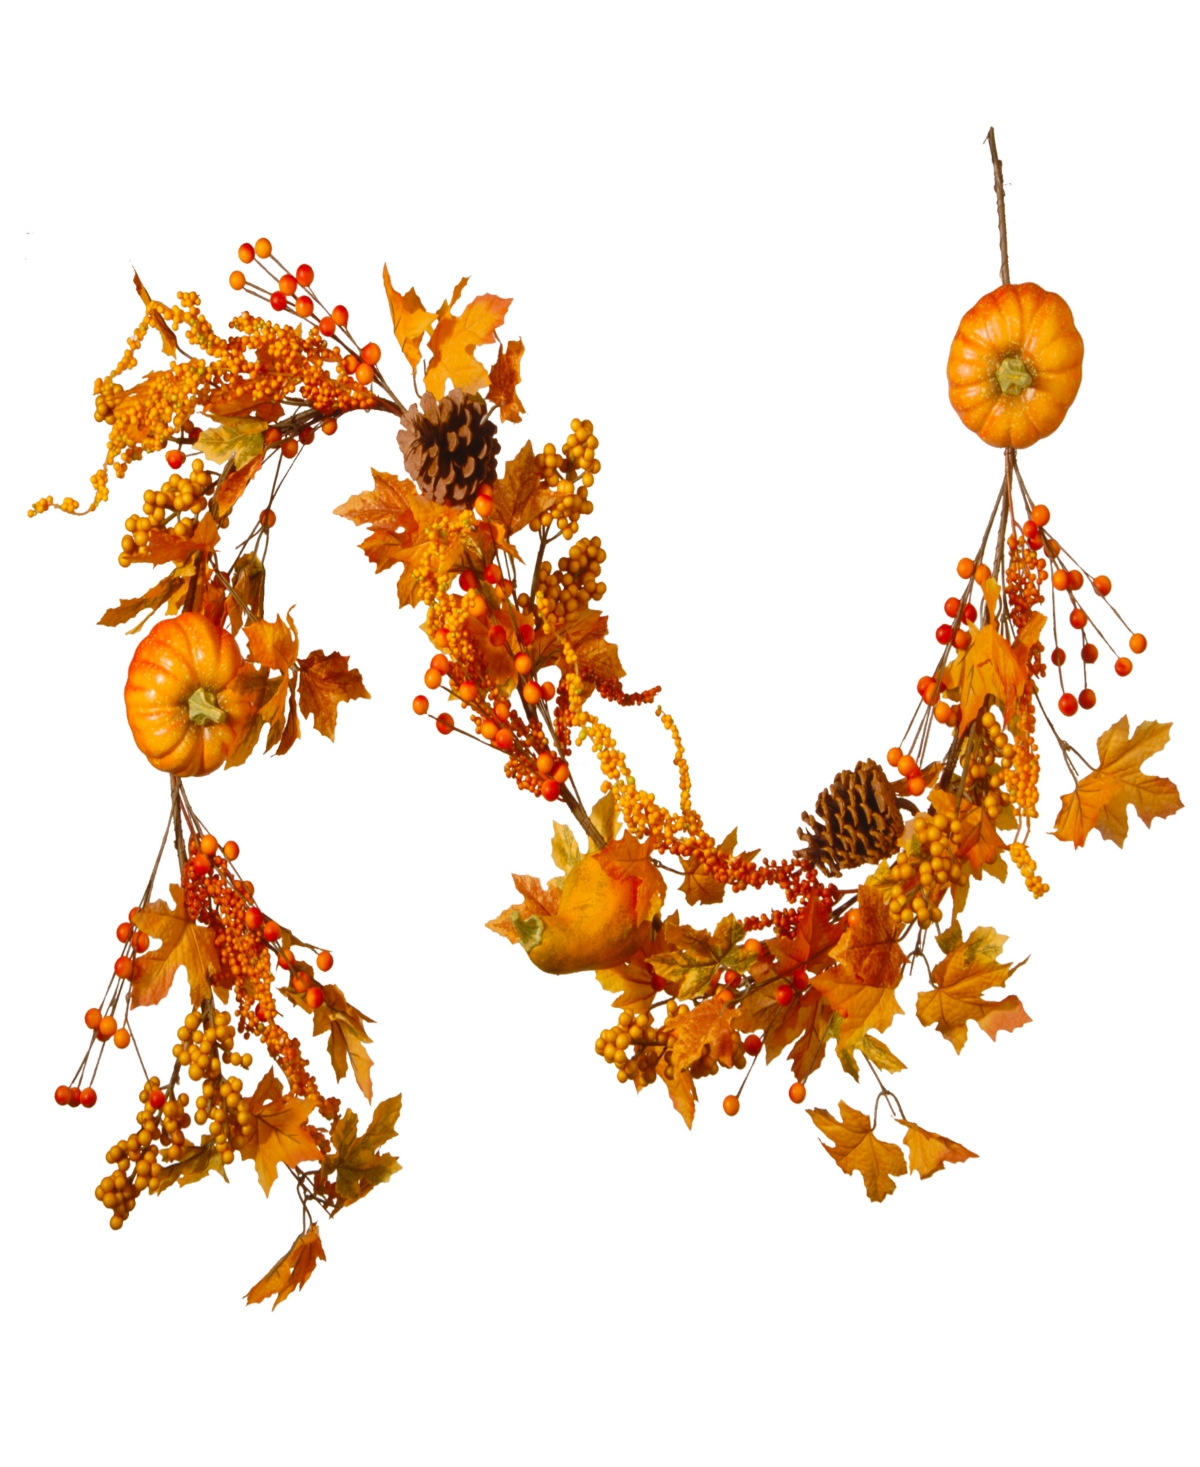 6' Artificial Autumn Garland, Made with Pumpkins, Pinecones, Berry Clusters, Maple Leaves, Autumn Collection - Orange